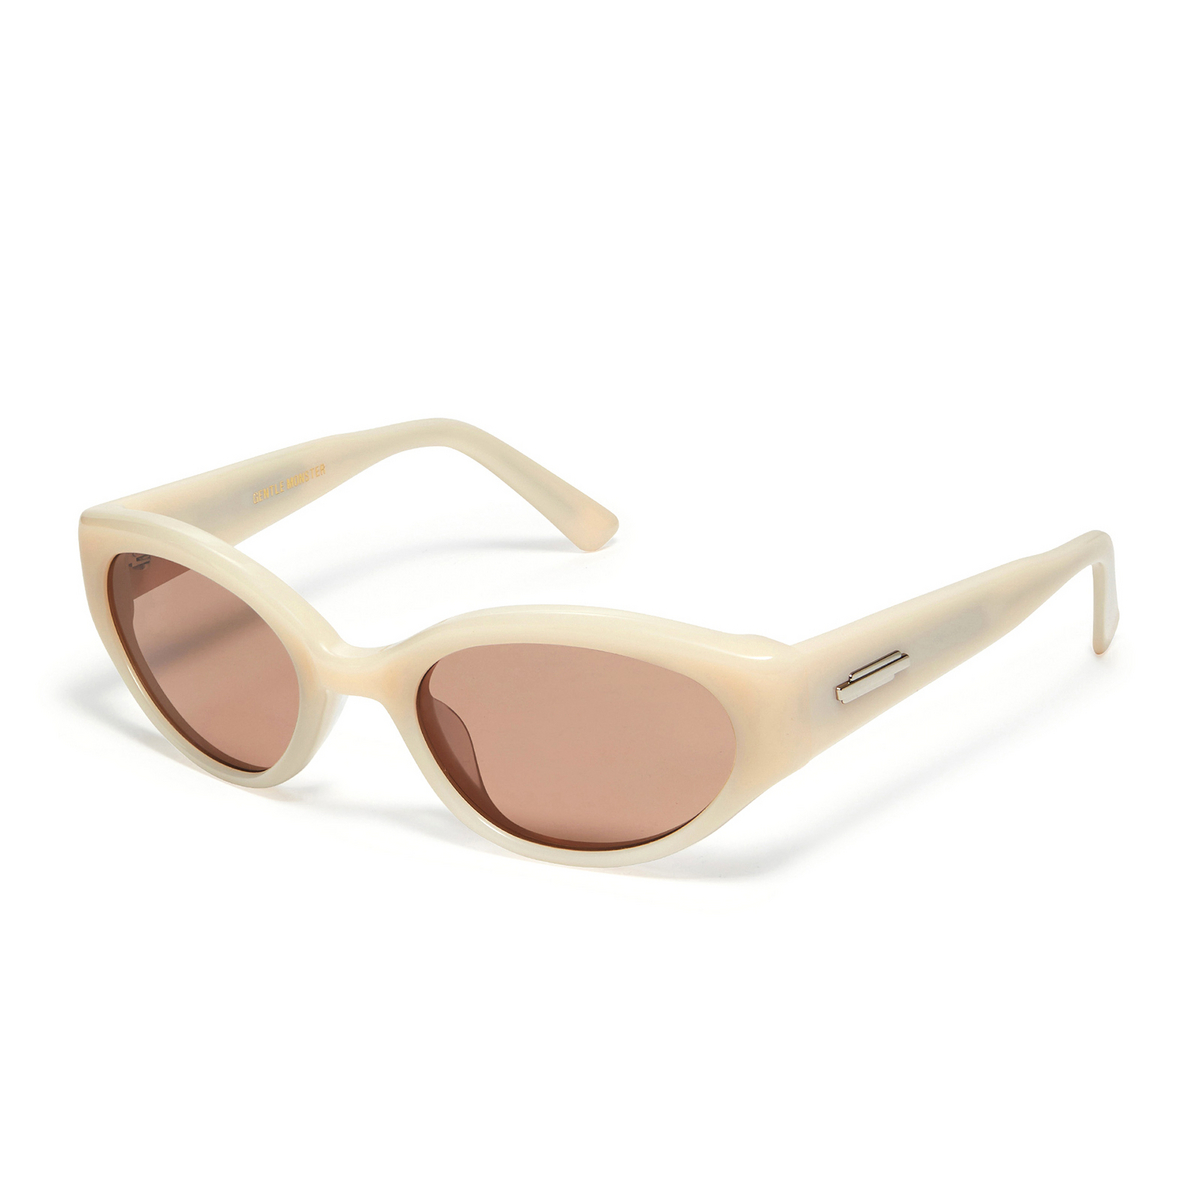 Gentle Monster® Cat-eye Sunglasses: Molto color IV1 Ivory - three-quarters view